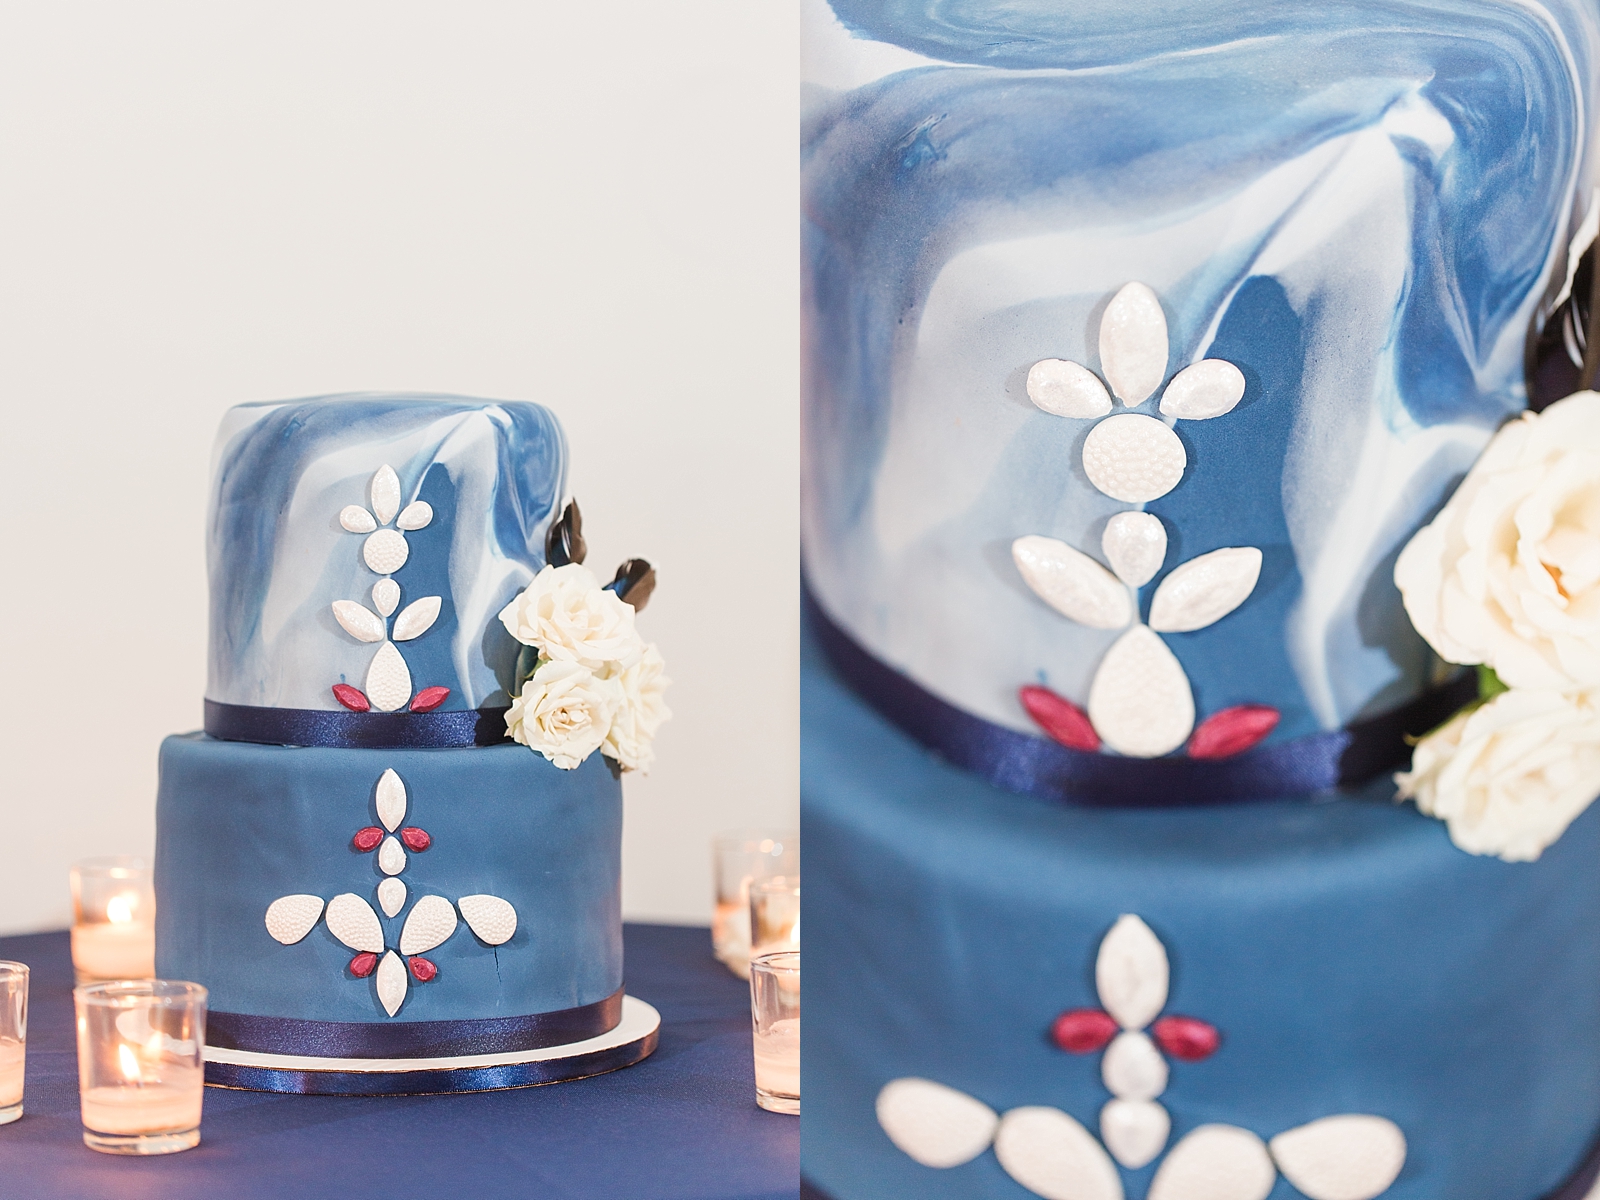 Juliette Chapel Wedding Cake with candles and Detail of cake Photos